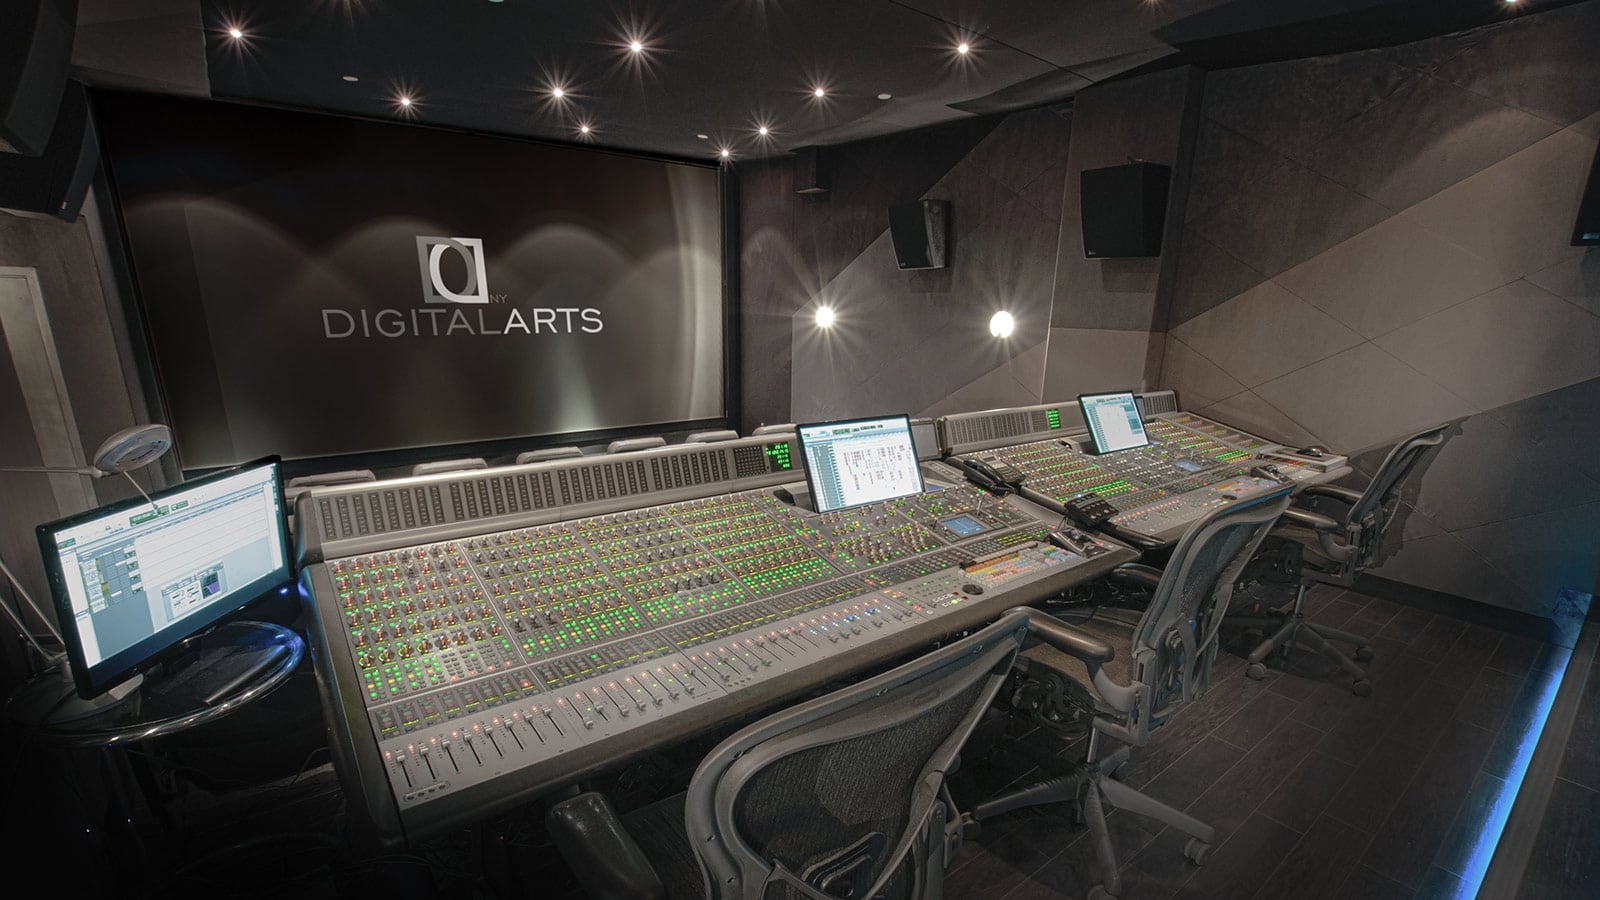 New York's Digital Arts Sets New Bar for Cinema Mixing with Meyer Sound